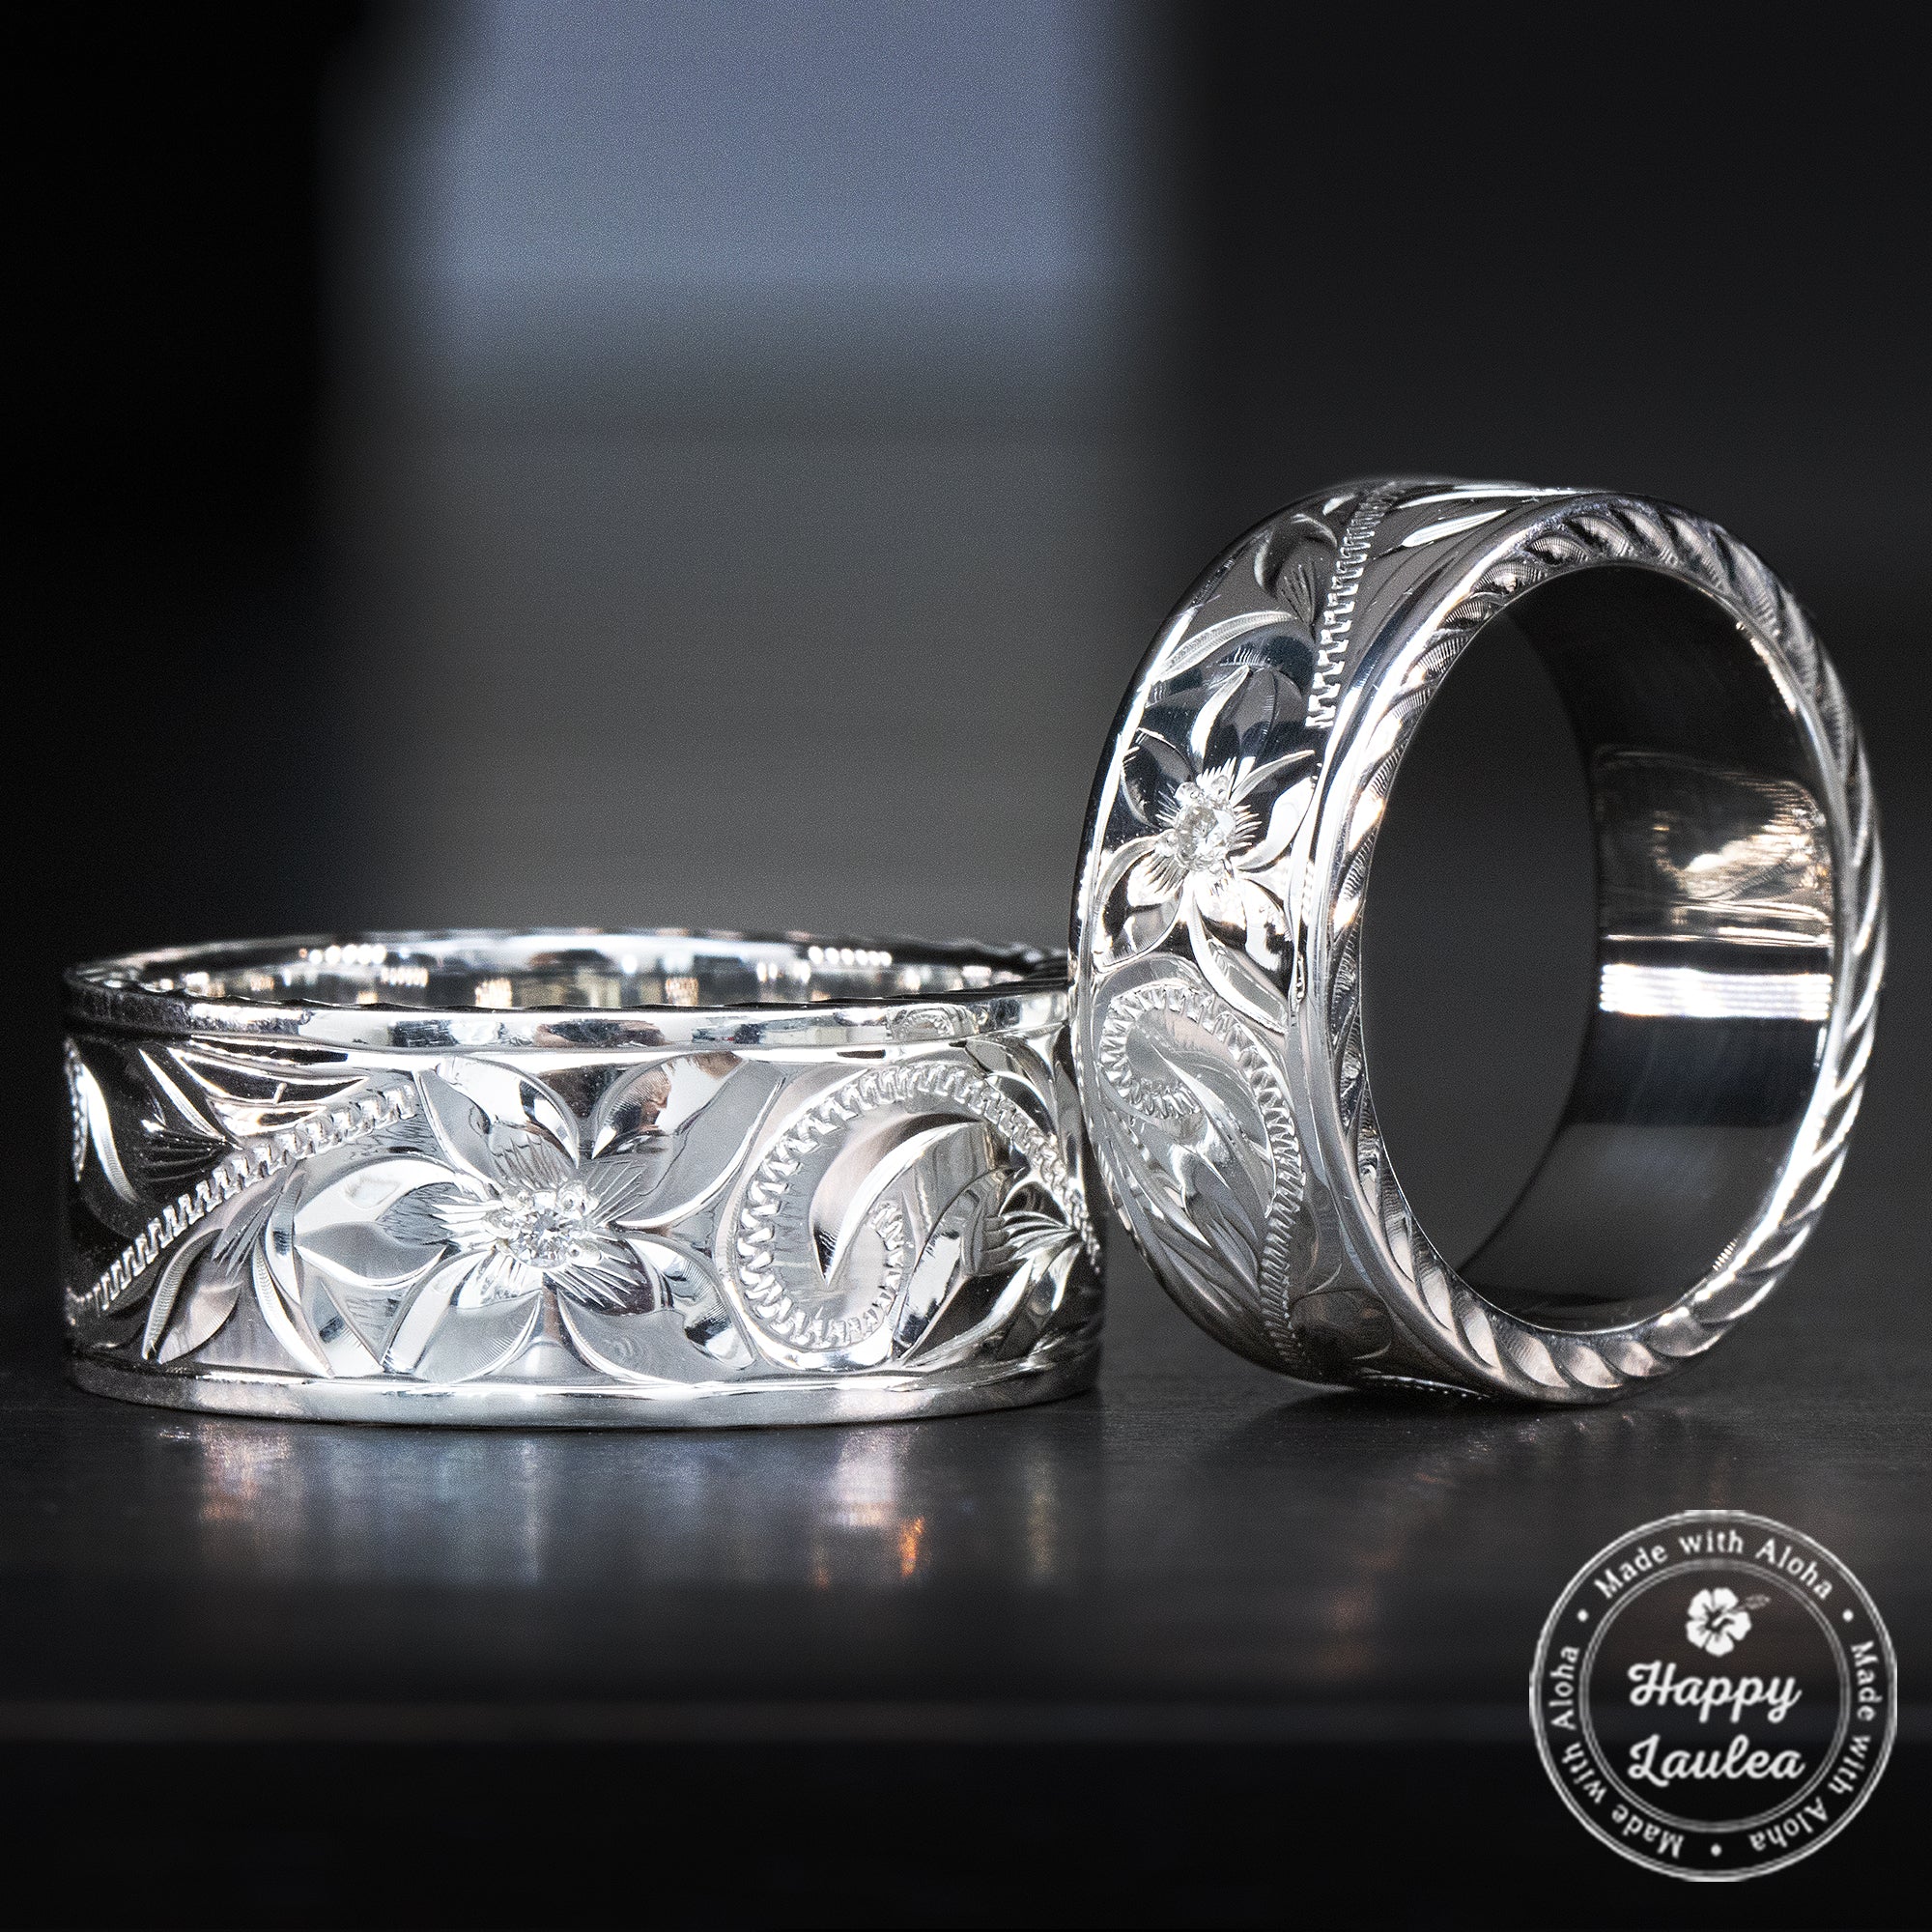 Sterling Silver Hawaiian Jewelry Ring with Old English Design & Diamond Cut Side Edge, 8mm-10mm, Flat Shape, Standard Fitment